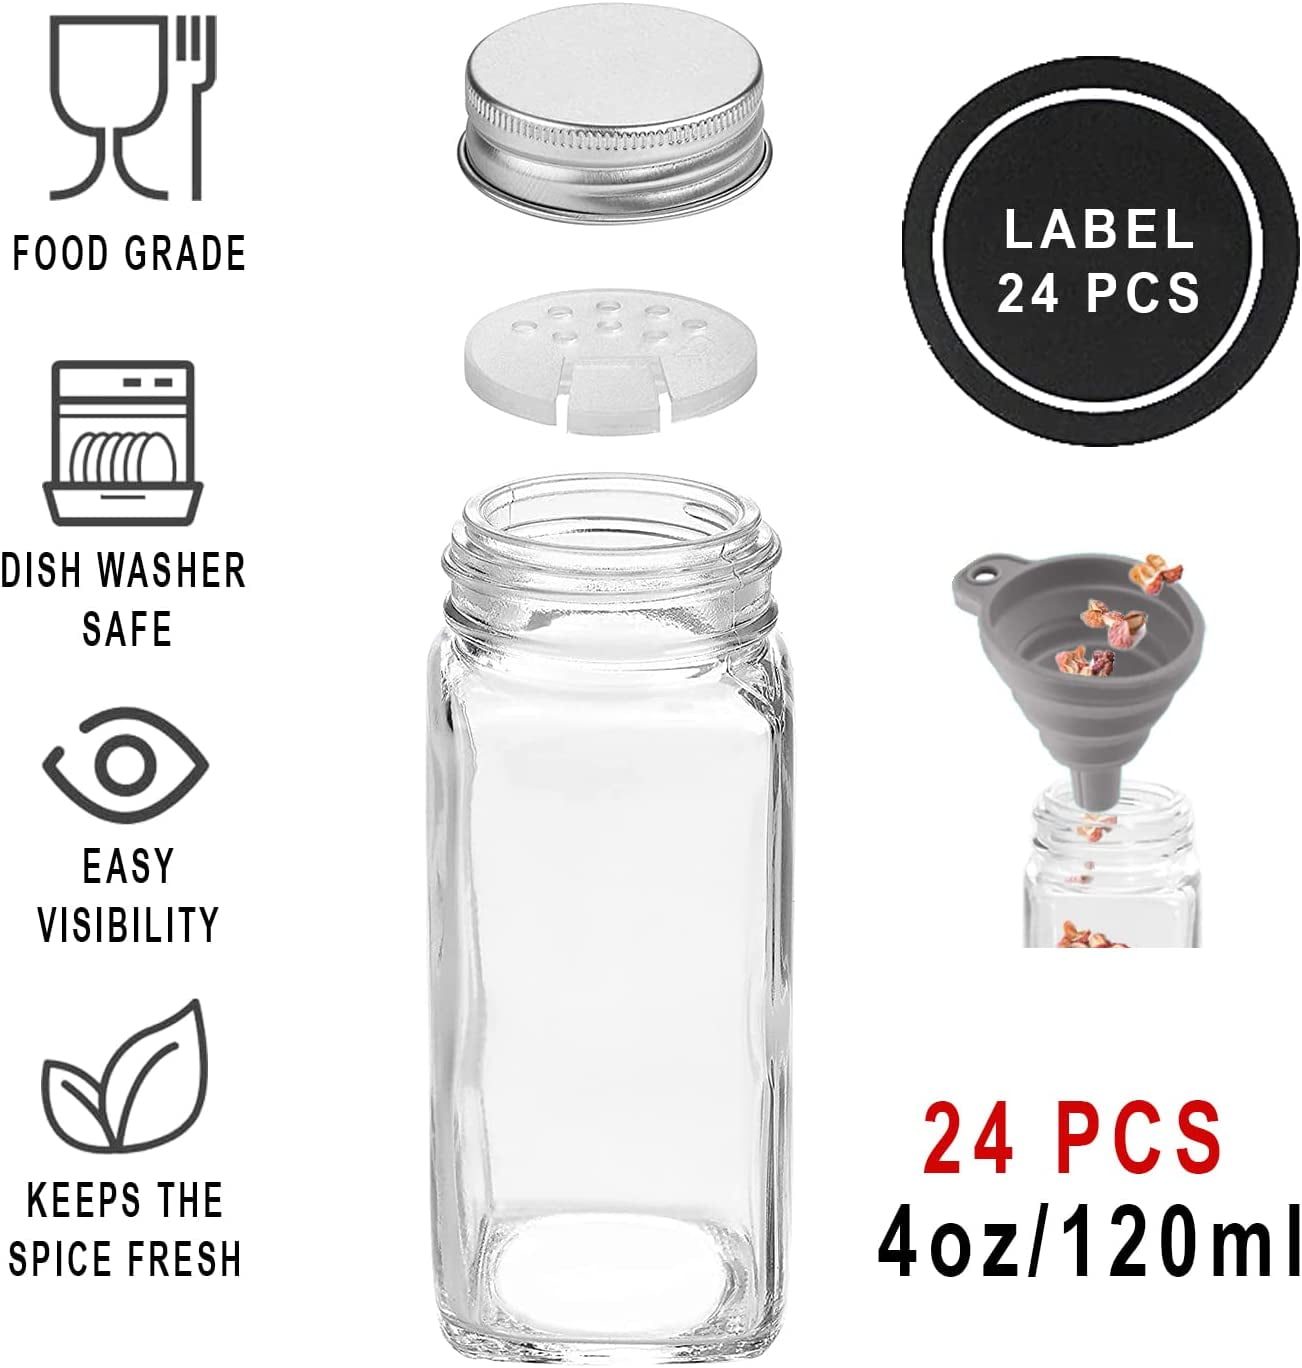 Datttcc 52 Pcs Glass Spice Jars,4oz Square Spice Containers with Golden  Caps,Glass Spice Bottles with Labels,Chalk,Funnel for Spice